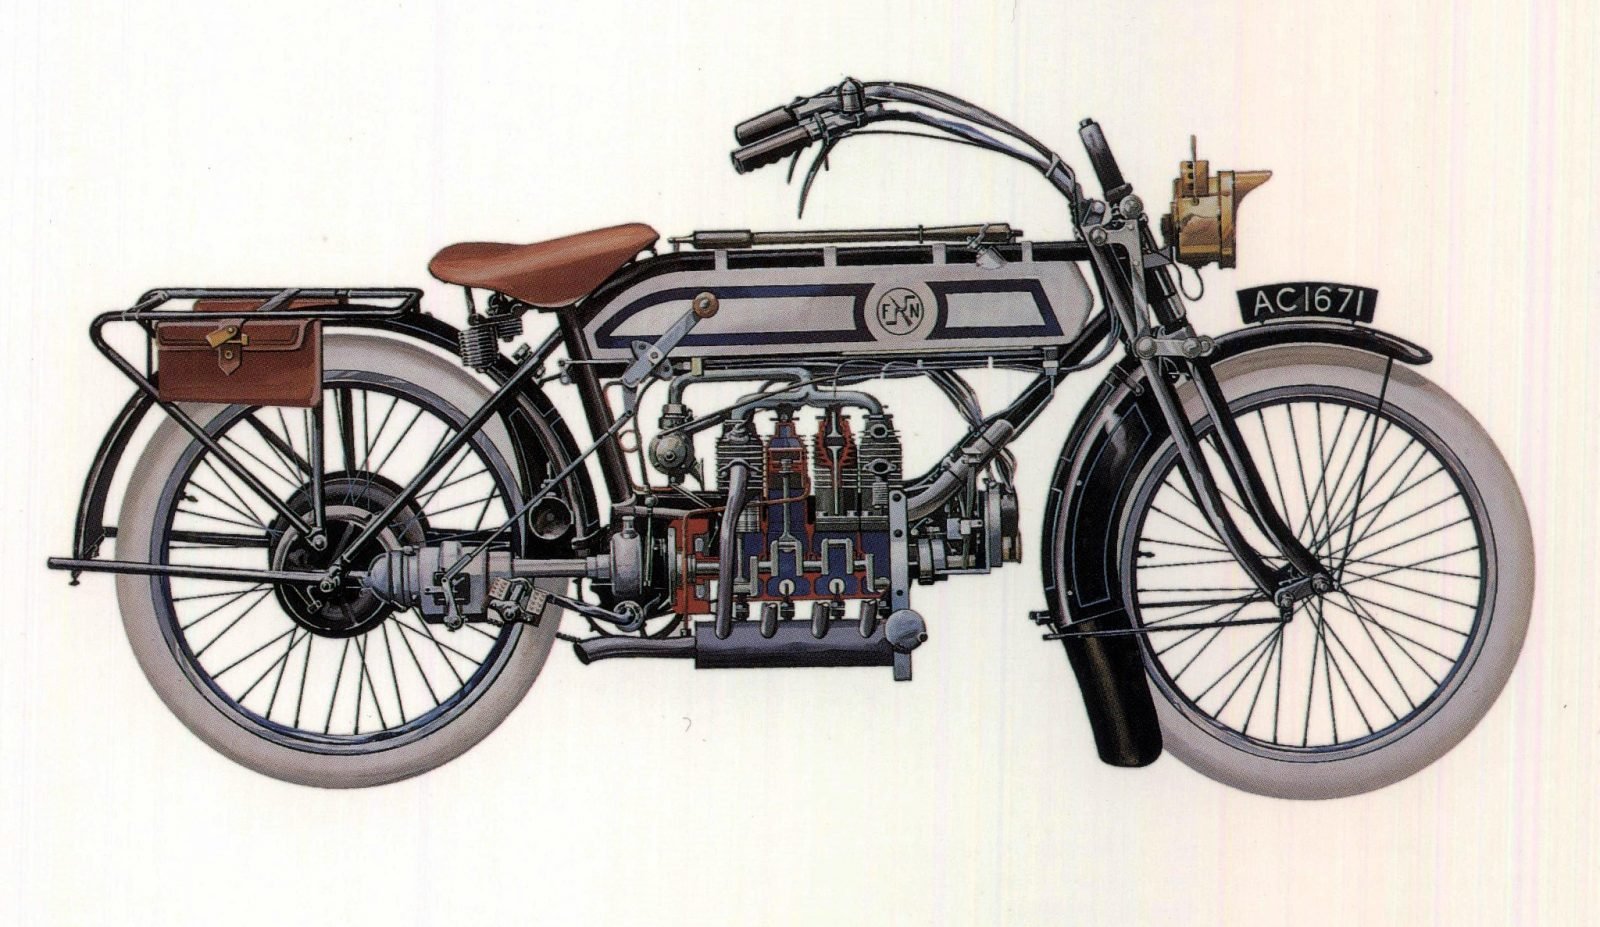 A Brief History of the Inline4 Cylinder Motorcycle